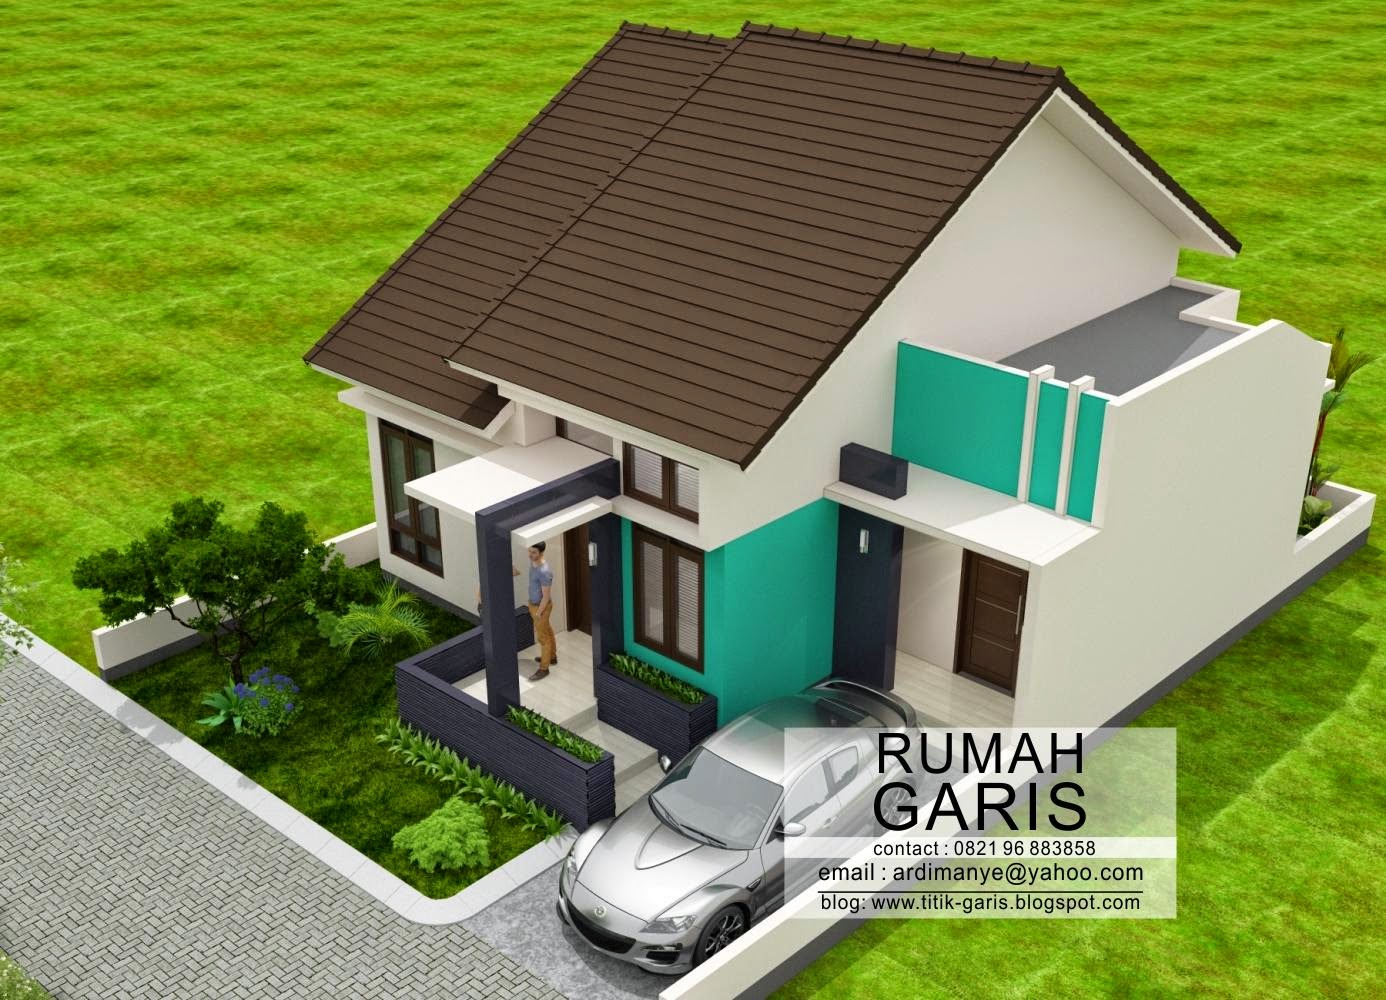 This three room house plan has a total floor area of 90 sq.m. which can be raised or worked in a 150 sq.m. parcel. With 10 meter facade, this one story design can advantageously ascend with fractional firewalls on the two sides.  The inside of the house is intended to be roomy by limiting gigantic dividers openly and semipublic zones. What's more, with the option of wide window openings that can without much of a stretch pass view to the back garden positively include all the more unreservedly amid the occasion or festivity in your residence HOUSE PLAN DESIGN ON 10X15 METER LOT Building area: 90 m2   Land Size: 10 x 15 meters   The main sleeping area (size 3mx5m) plus bathroom  Bedroom, 2 pieces (size 3mx3m)  Living room   Family room together with dining room and kitchen  Km / toilet  Shower/sink  Backyard garden and patio area of 9 m2  2-STOREY RESIDENTIAL HOUSE PLAN This house is made extraordinary in light of the fact that it is intended for 2 stories yet when seen from the front looks like only a house 1 story.   Land Area: 10 x 15.6 meters   Building Area: Lt.1 = 112 m2 and Lt.2 = 28  1st floor Master bedroom  2 bedrooms  Living room  Family room  Minibar & kitchen  Km / WC  Bathroom/laundry room  Garden and back porch  Showroom  2nd Floor Bedroom  Karaoke room  The lounge This home plan is made as agreeable as conceivable by increasing openings to amplify air and light that go into each room and keep the room has a view to the front garden and back of the house.  Land Area: 8 x 19 meters   Building Area: 210 m2  Master bedroom plus km / WC  Child's bedroom  Guest room  Living room  Family room  Kitchen   The dining room  Km / WC  Laundry area and drying area  Garden/back porch and side of house carport  SOURCE: Rumah Garis  RELATED POSTS: